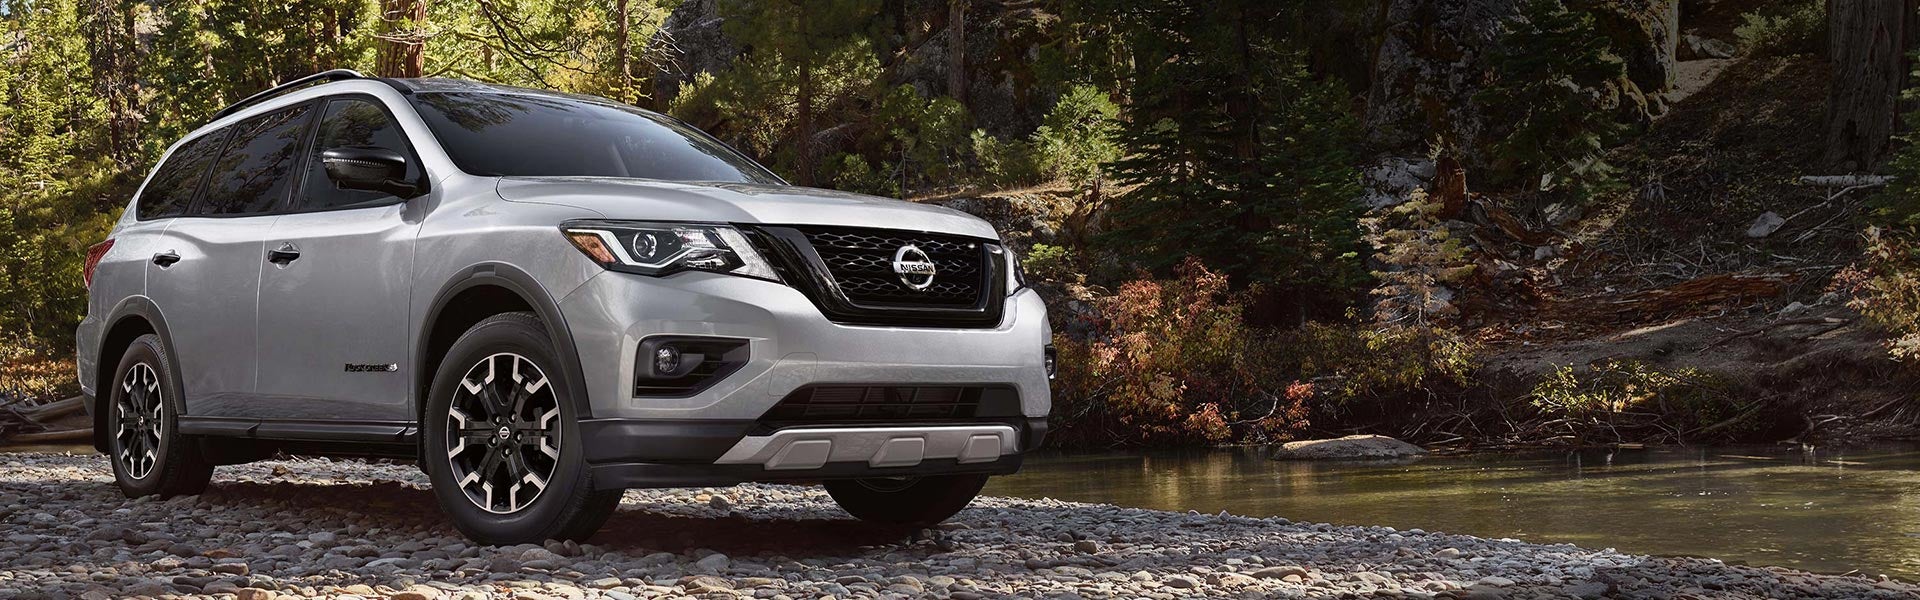 2021 Nissan Pathfinder next to a river in the woods